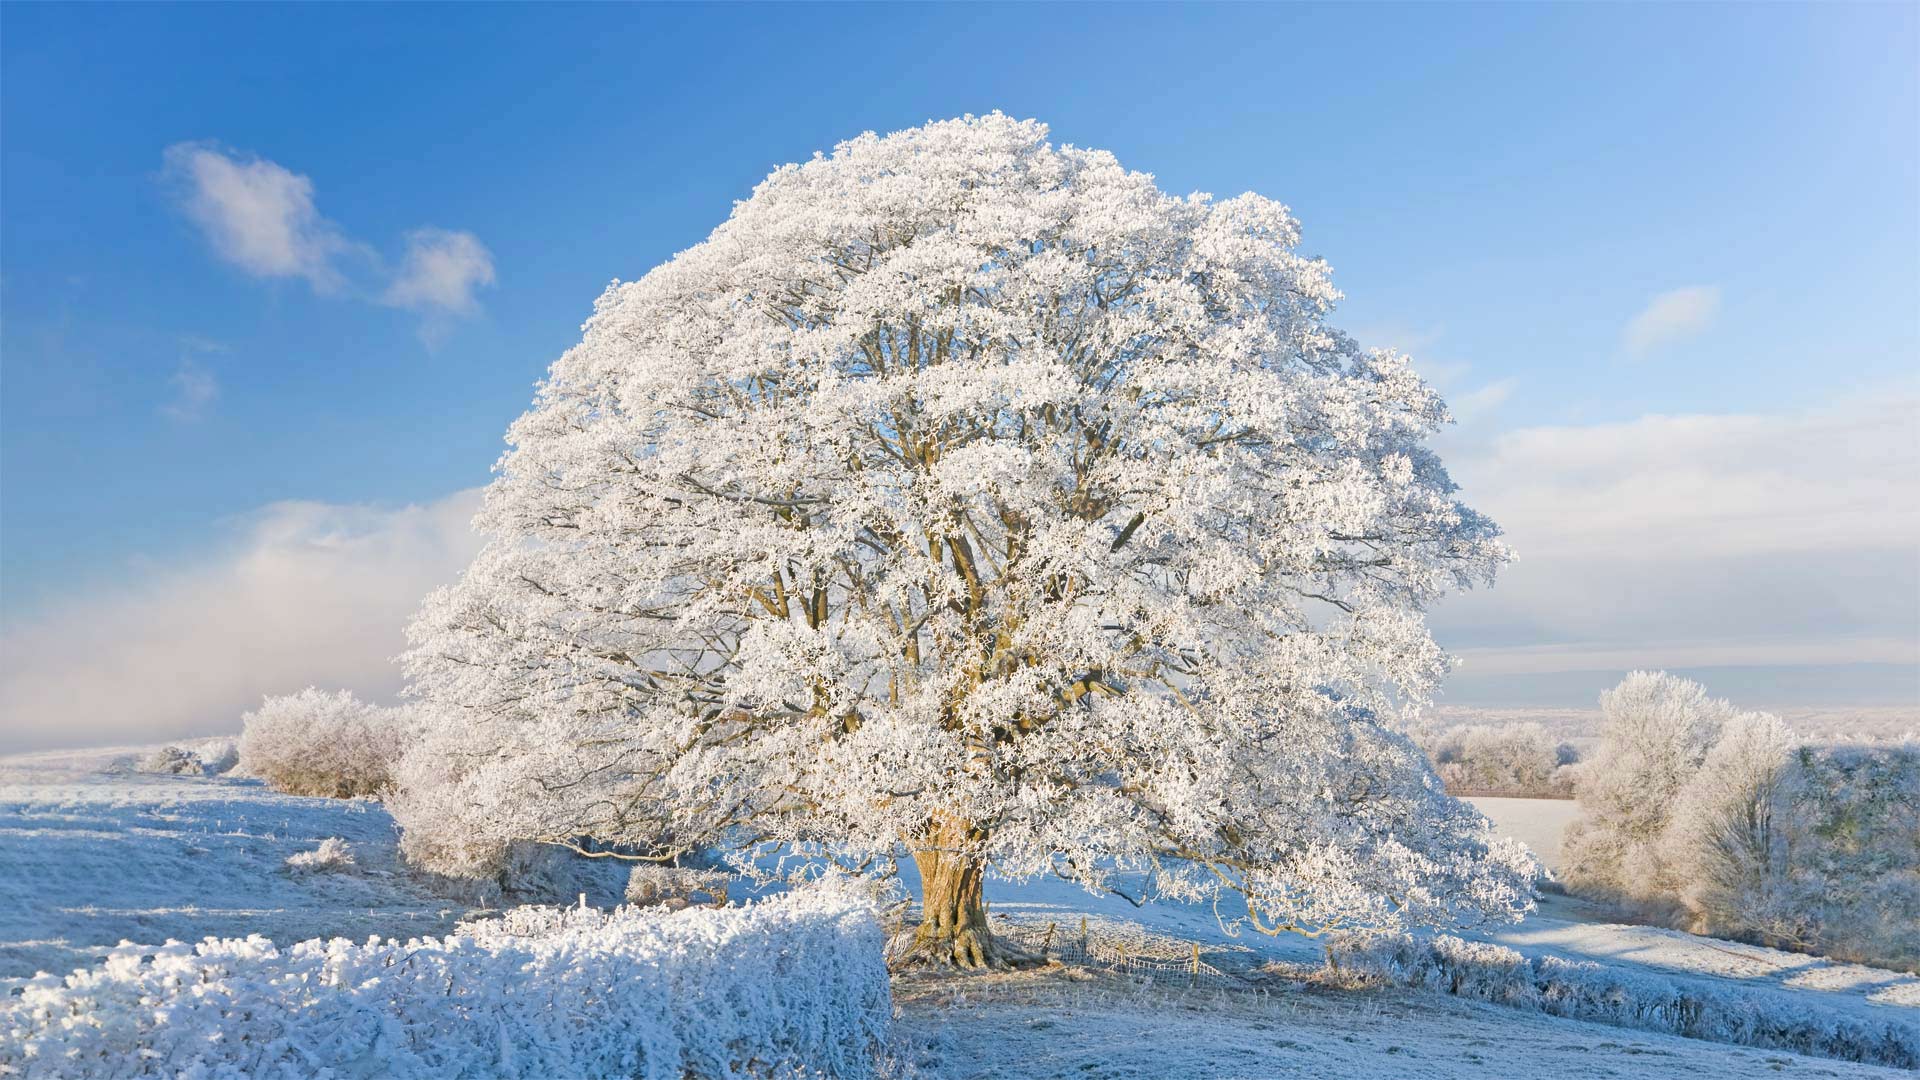 Hoarfrost and snow in the Cotswolds, England - Peter Adams/Getty Images)